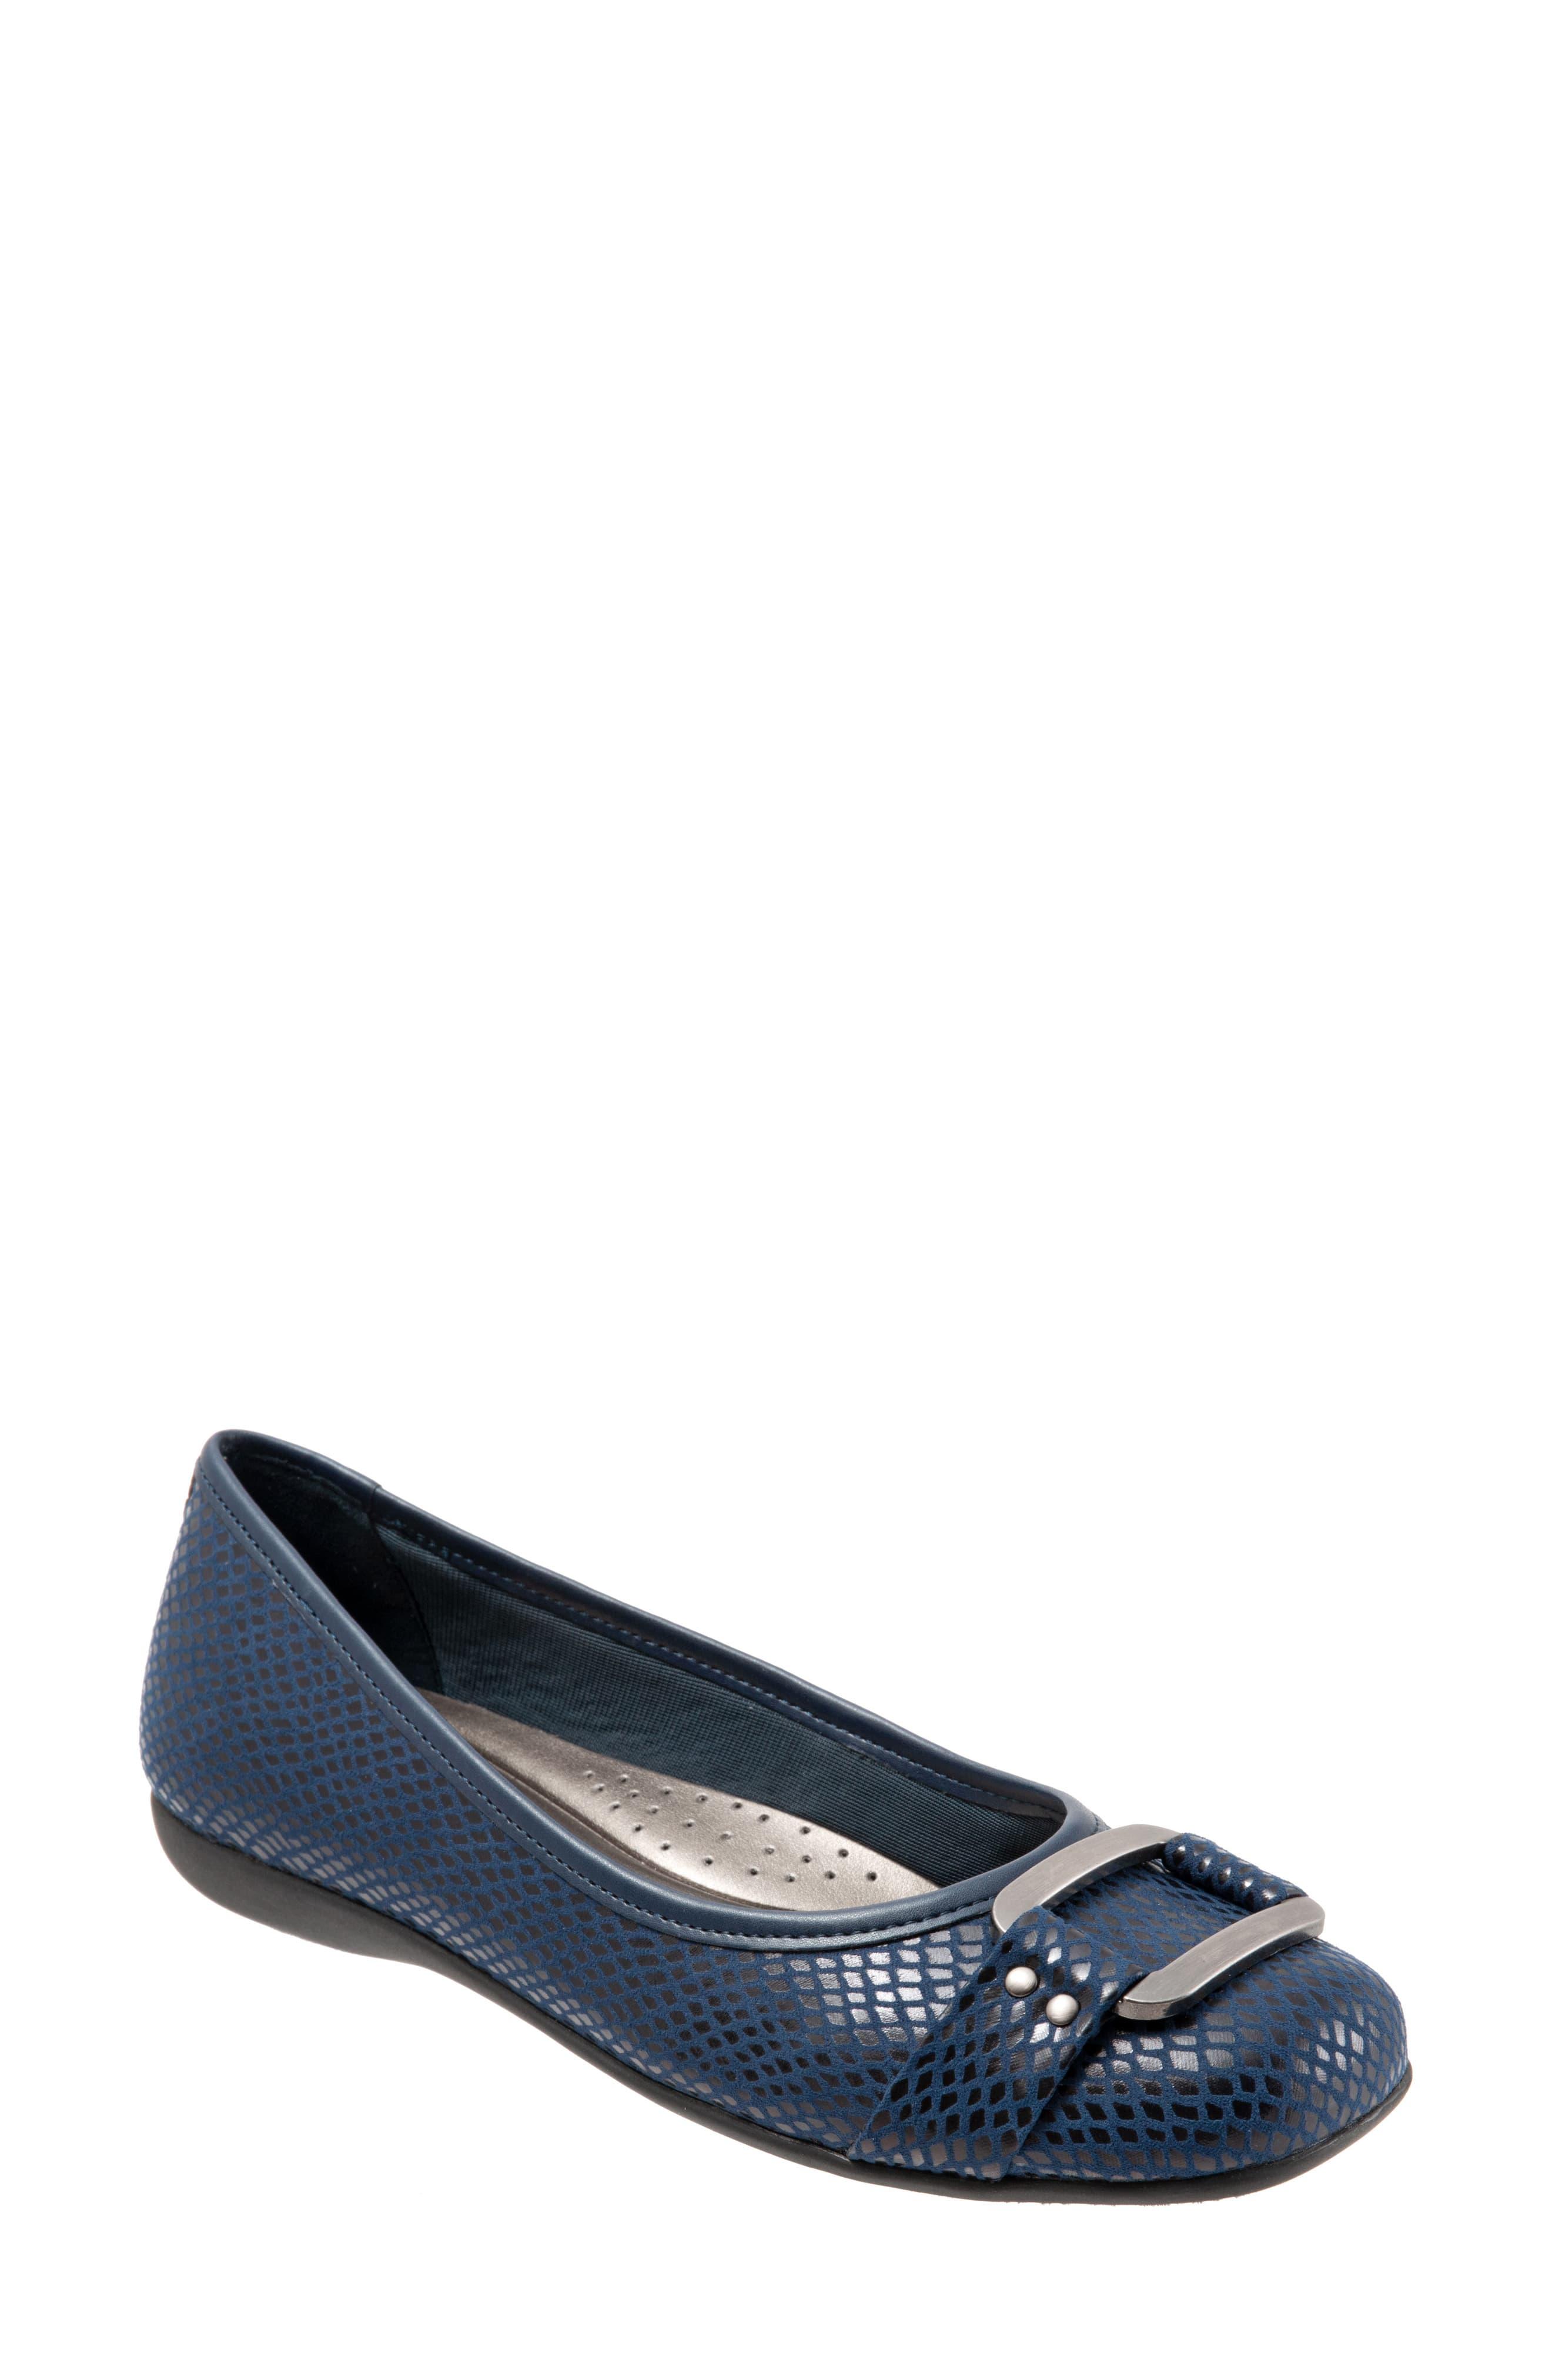 Trotters Denim 'sizzle Signature' Flat in Navy (Blue) - Lyst